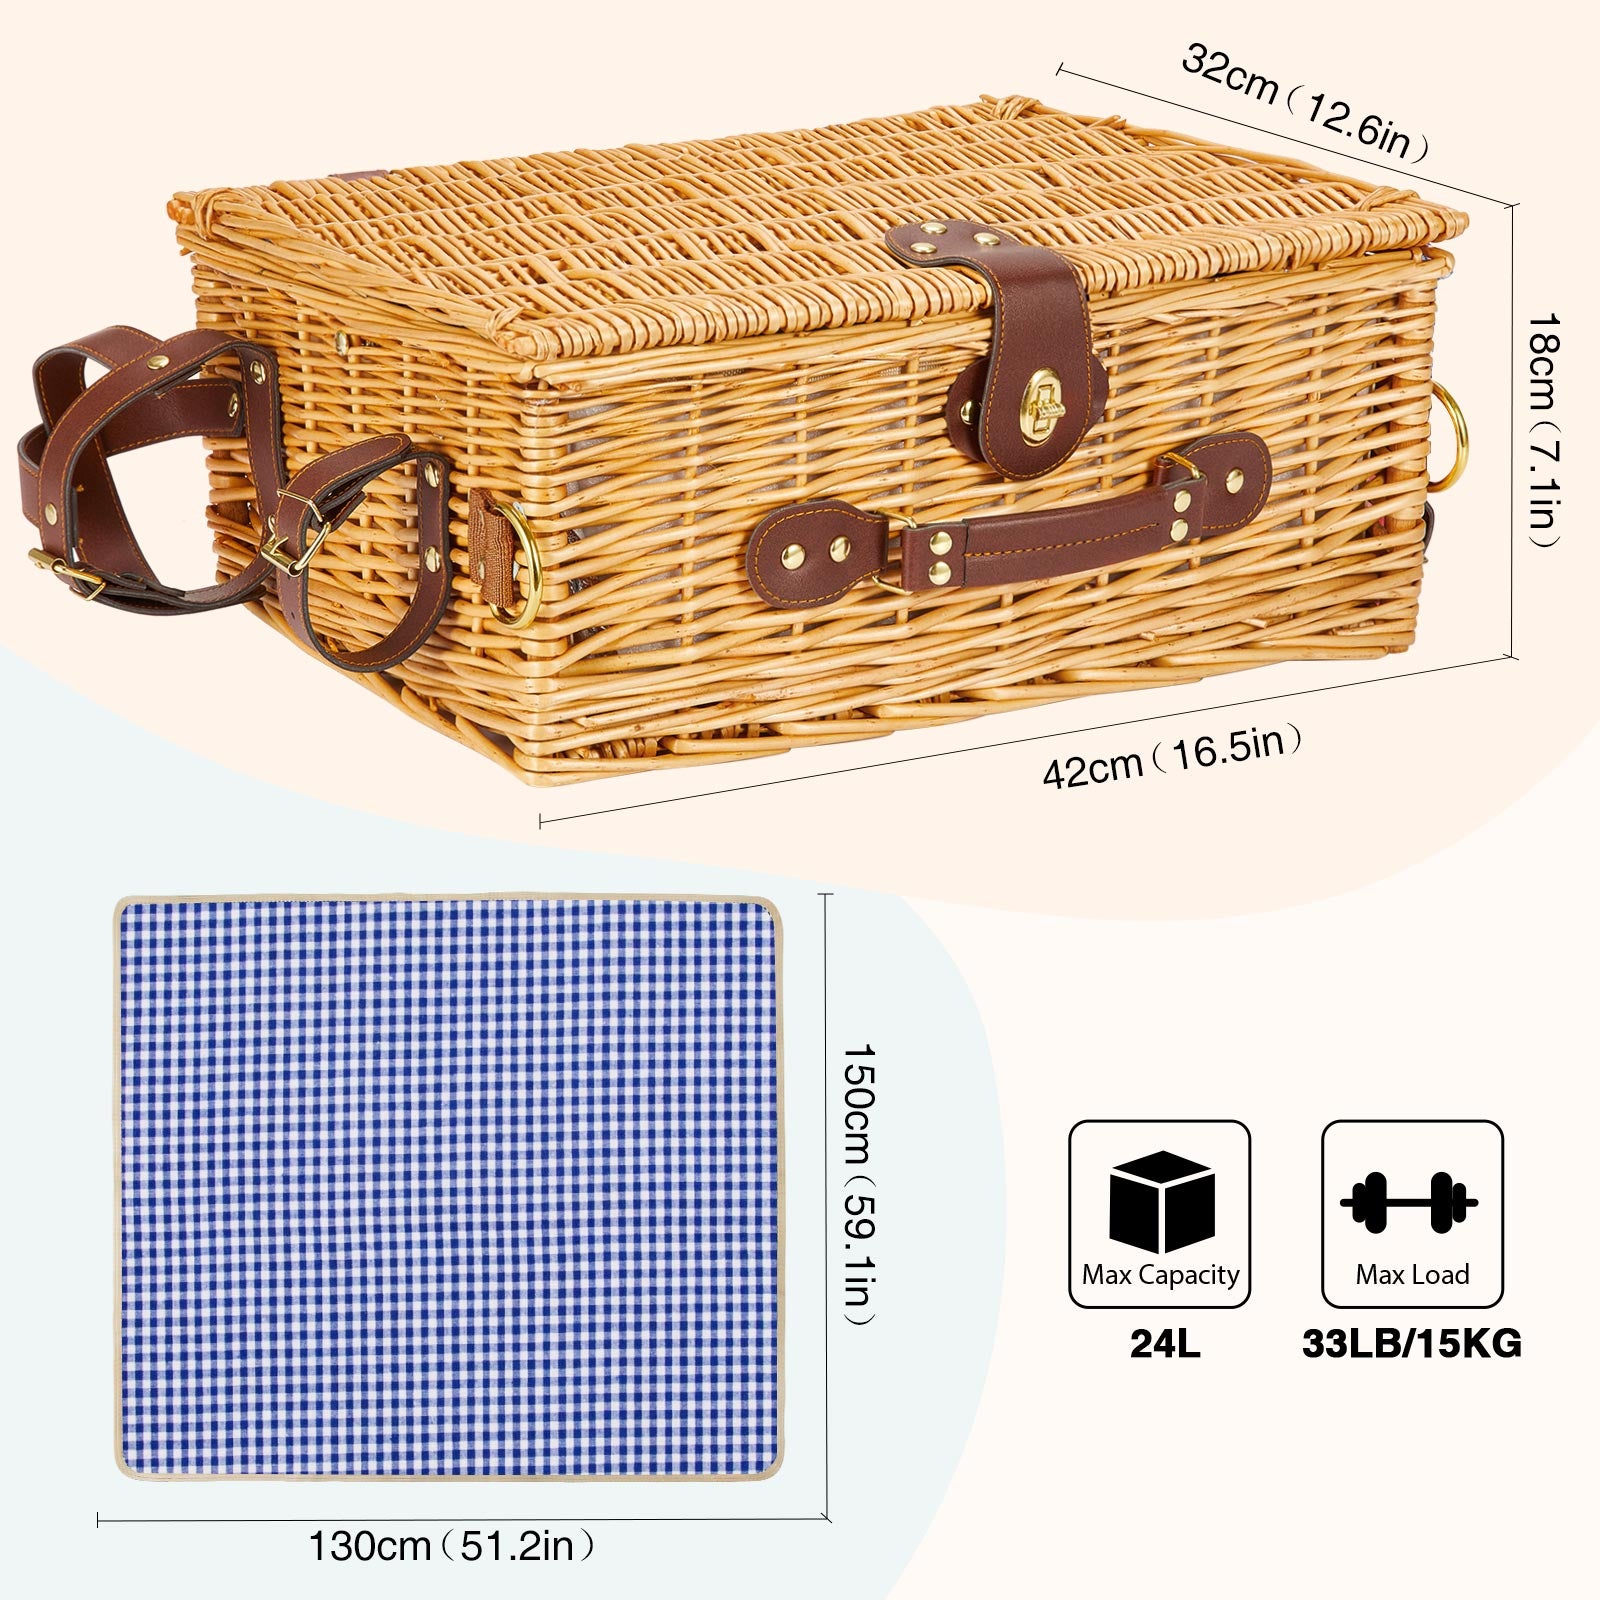 Sealing Sets Basket Picnic Greenstell Wicker Insulation High Laye with